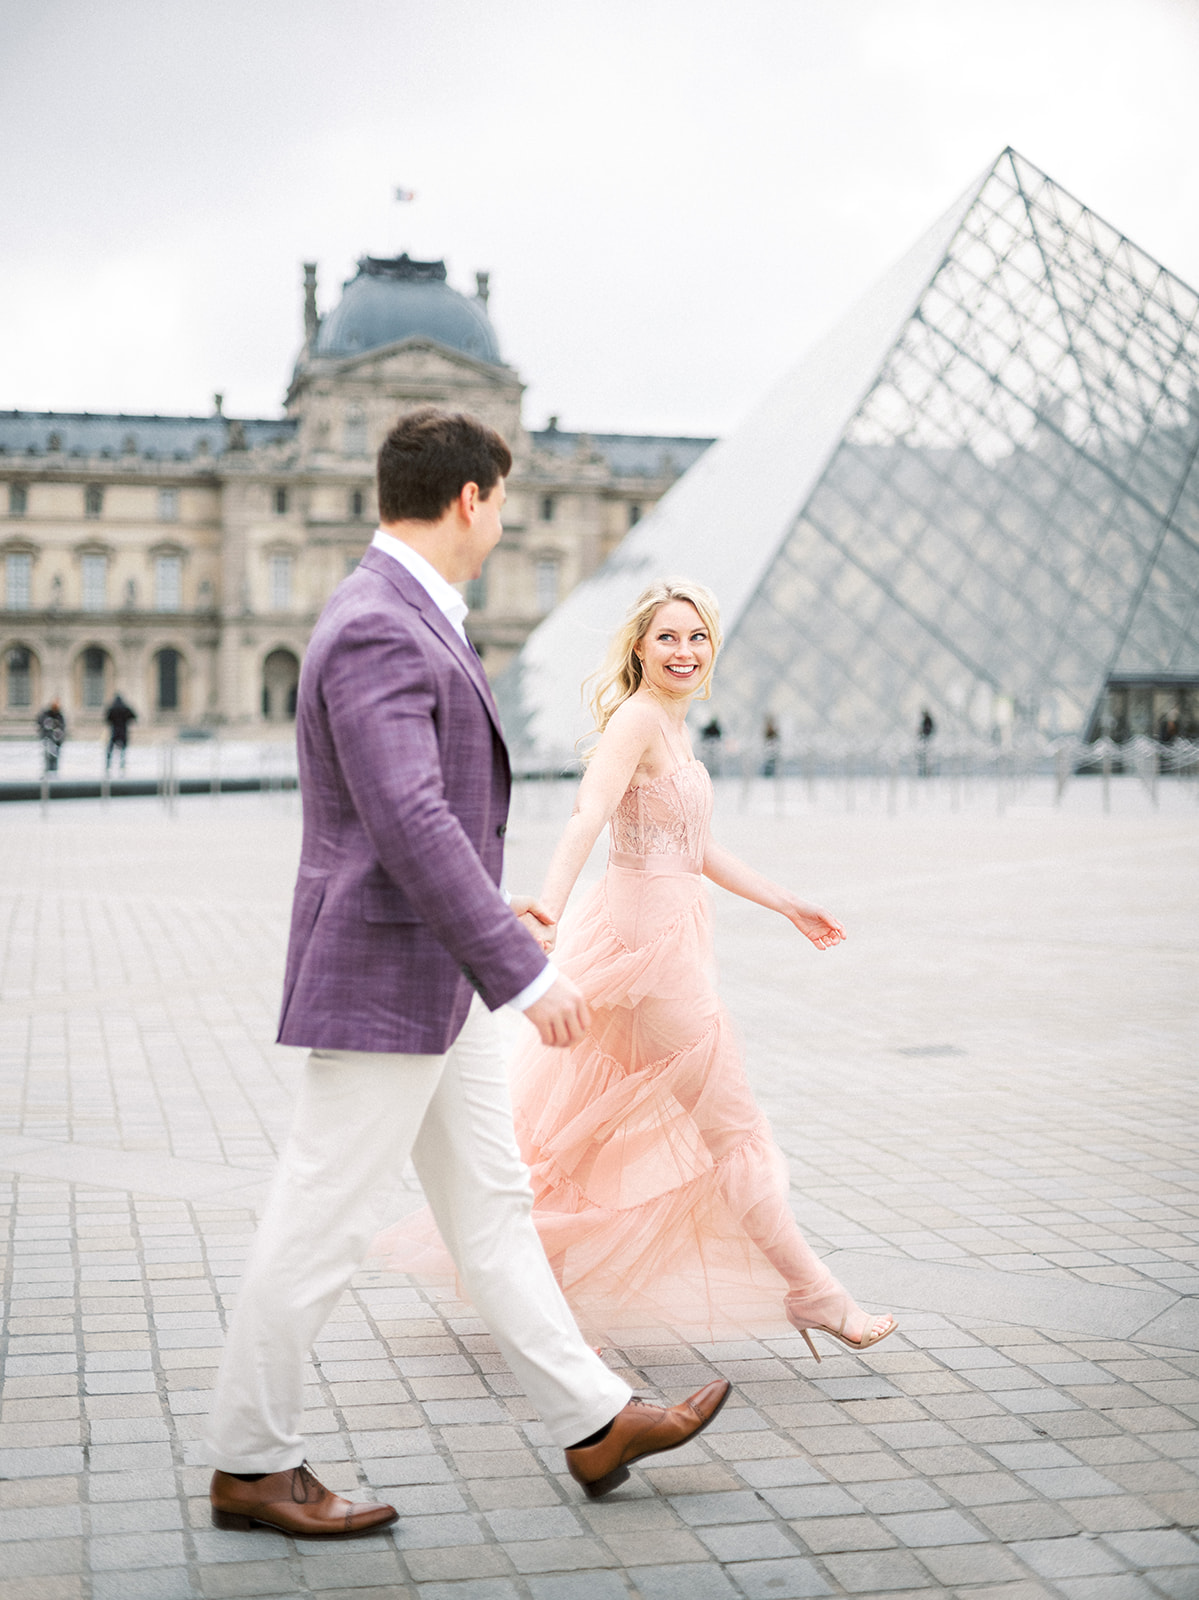 Couple walking away during their Paris engagement session.